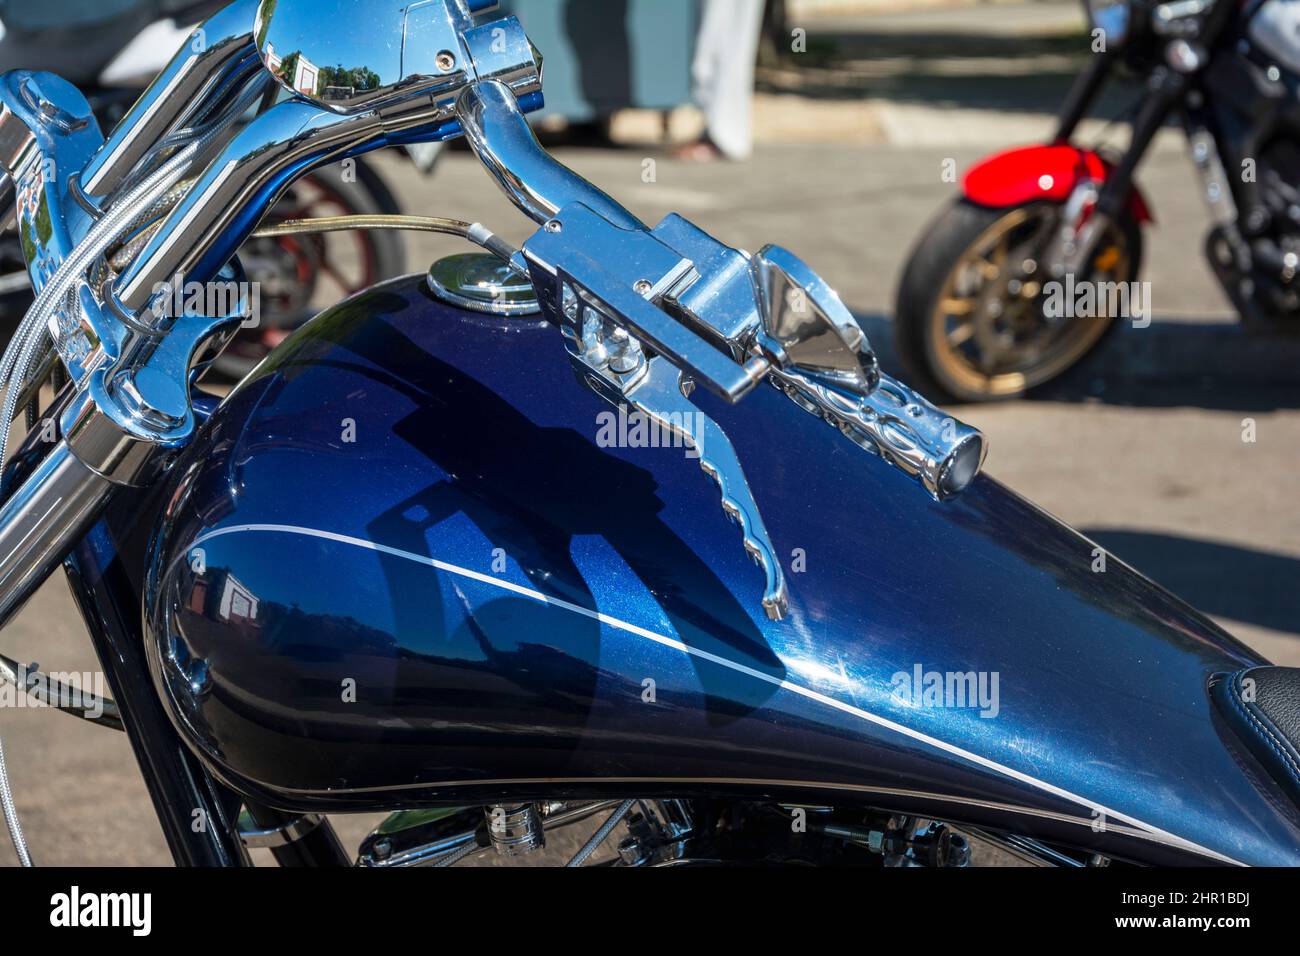 Beautiful top view of a motorcycle, blue motorcycle gas tank, motorcycle steering wheel, Shining chrome, gas handle, Stylish motorcycle look Stock Photo